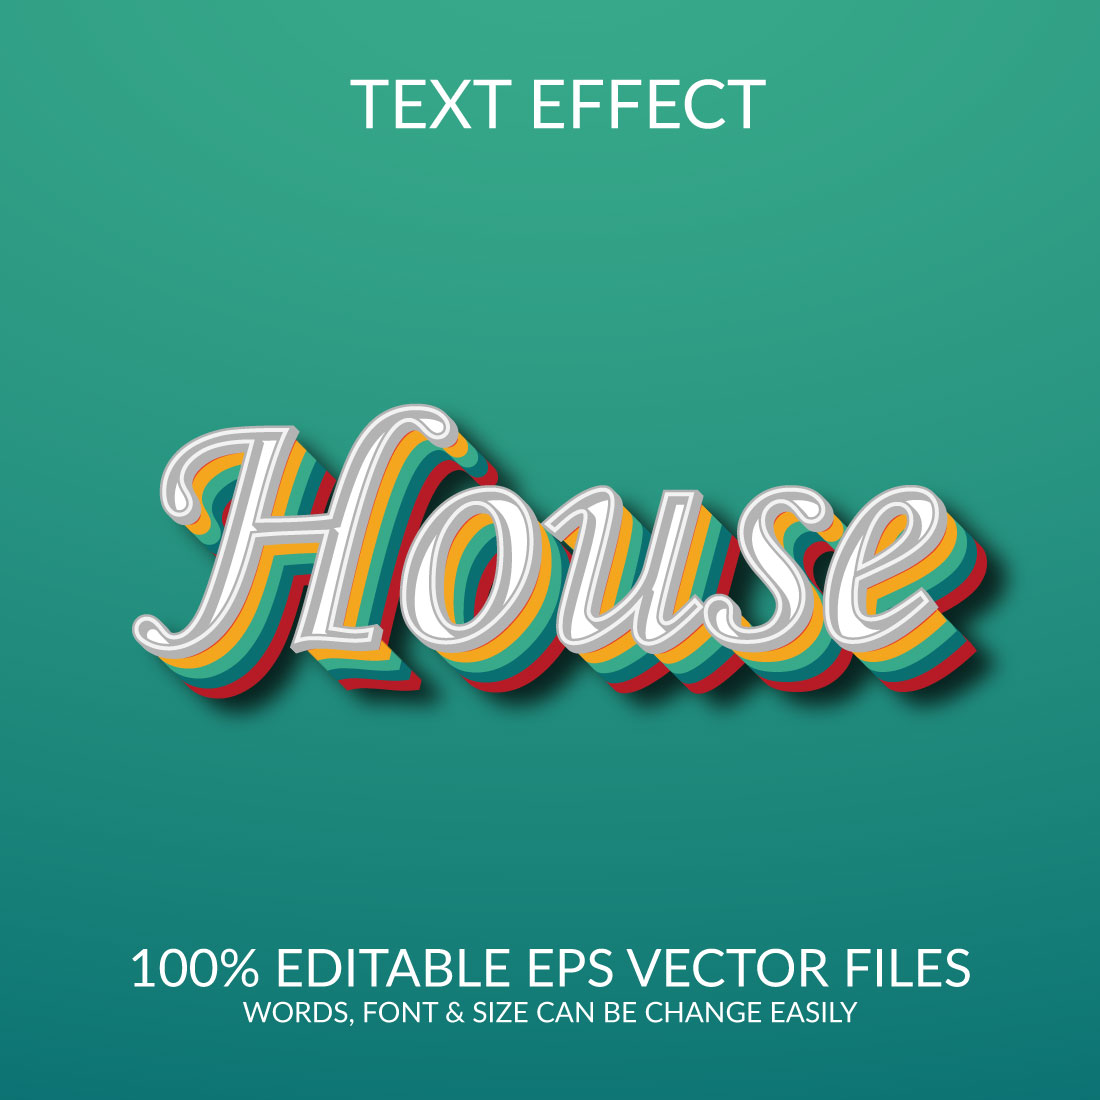 House 3d text effect template design cover image.